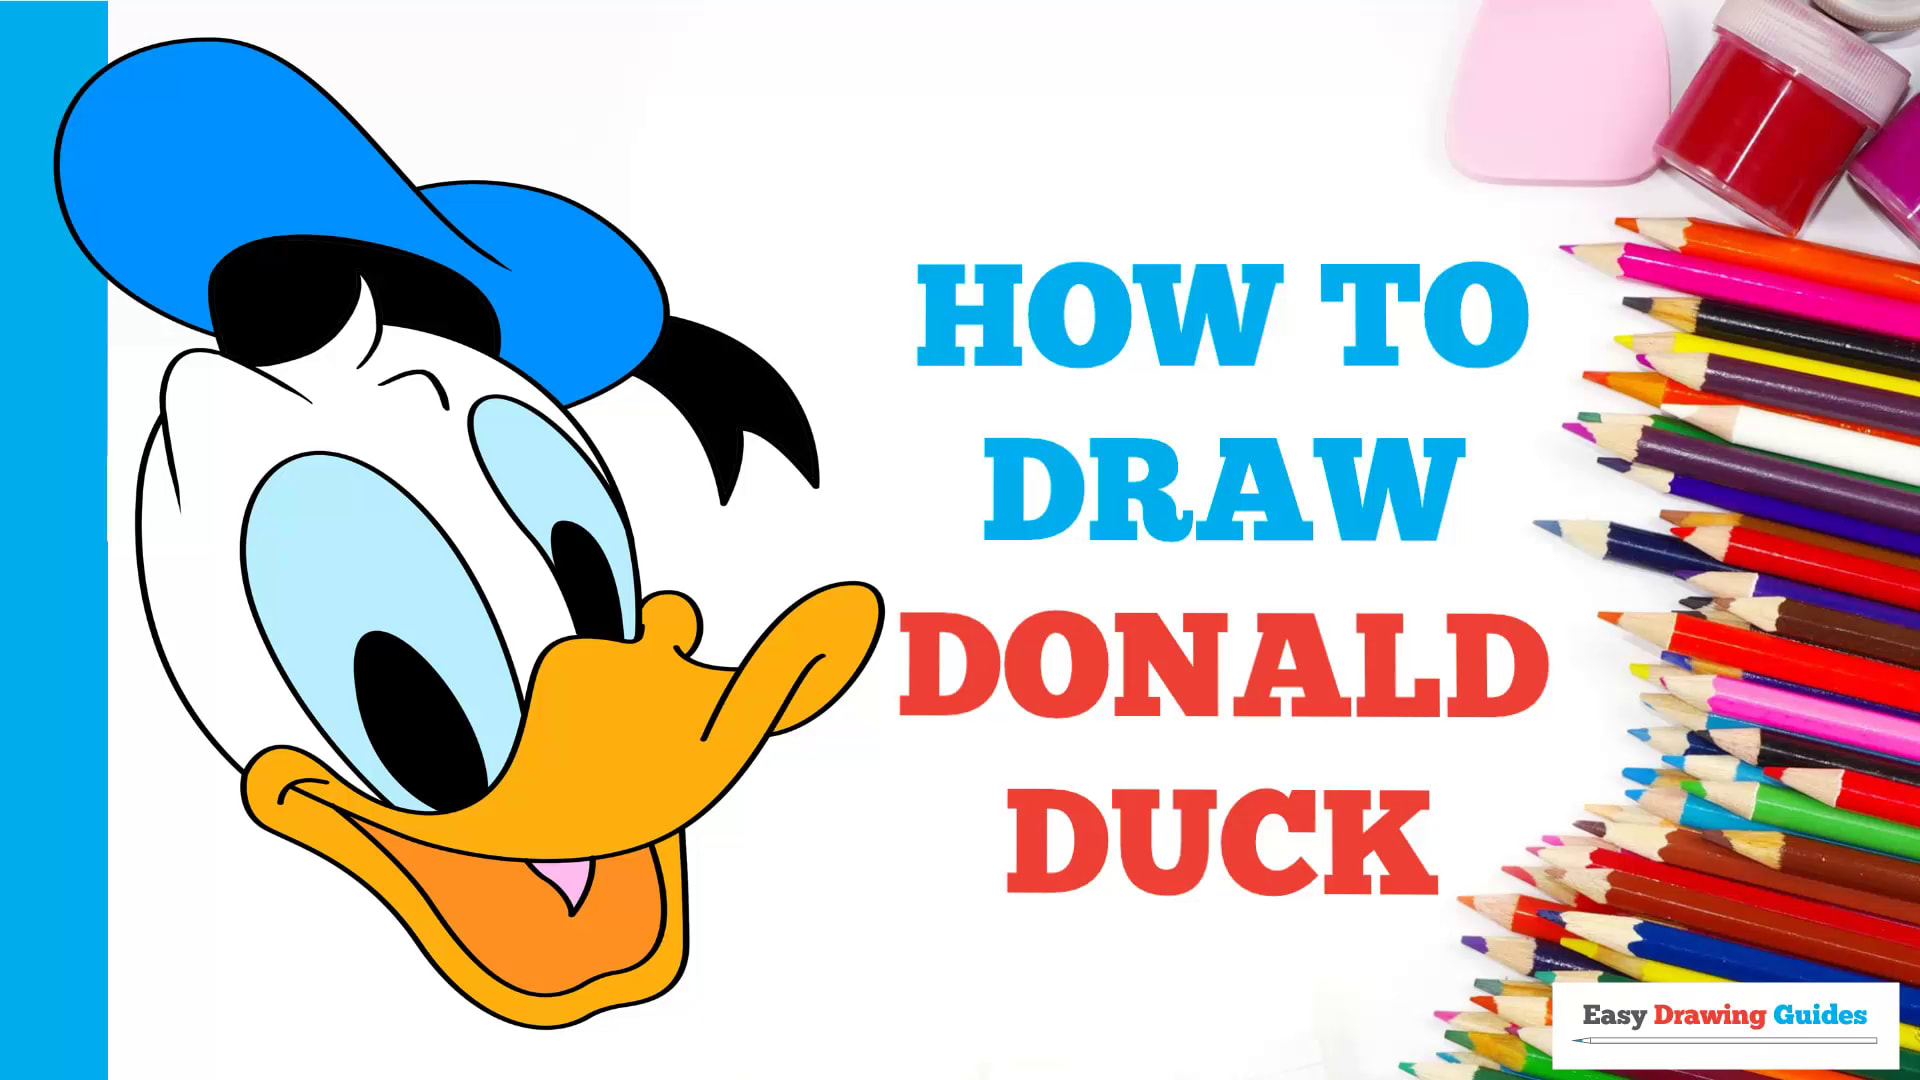 How to draw a Donald Duck Step by Step